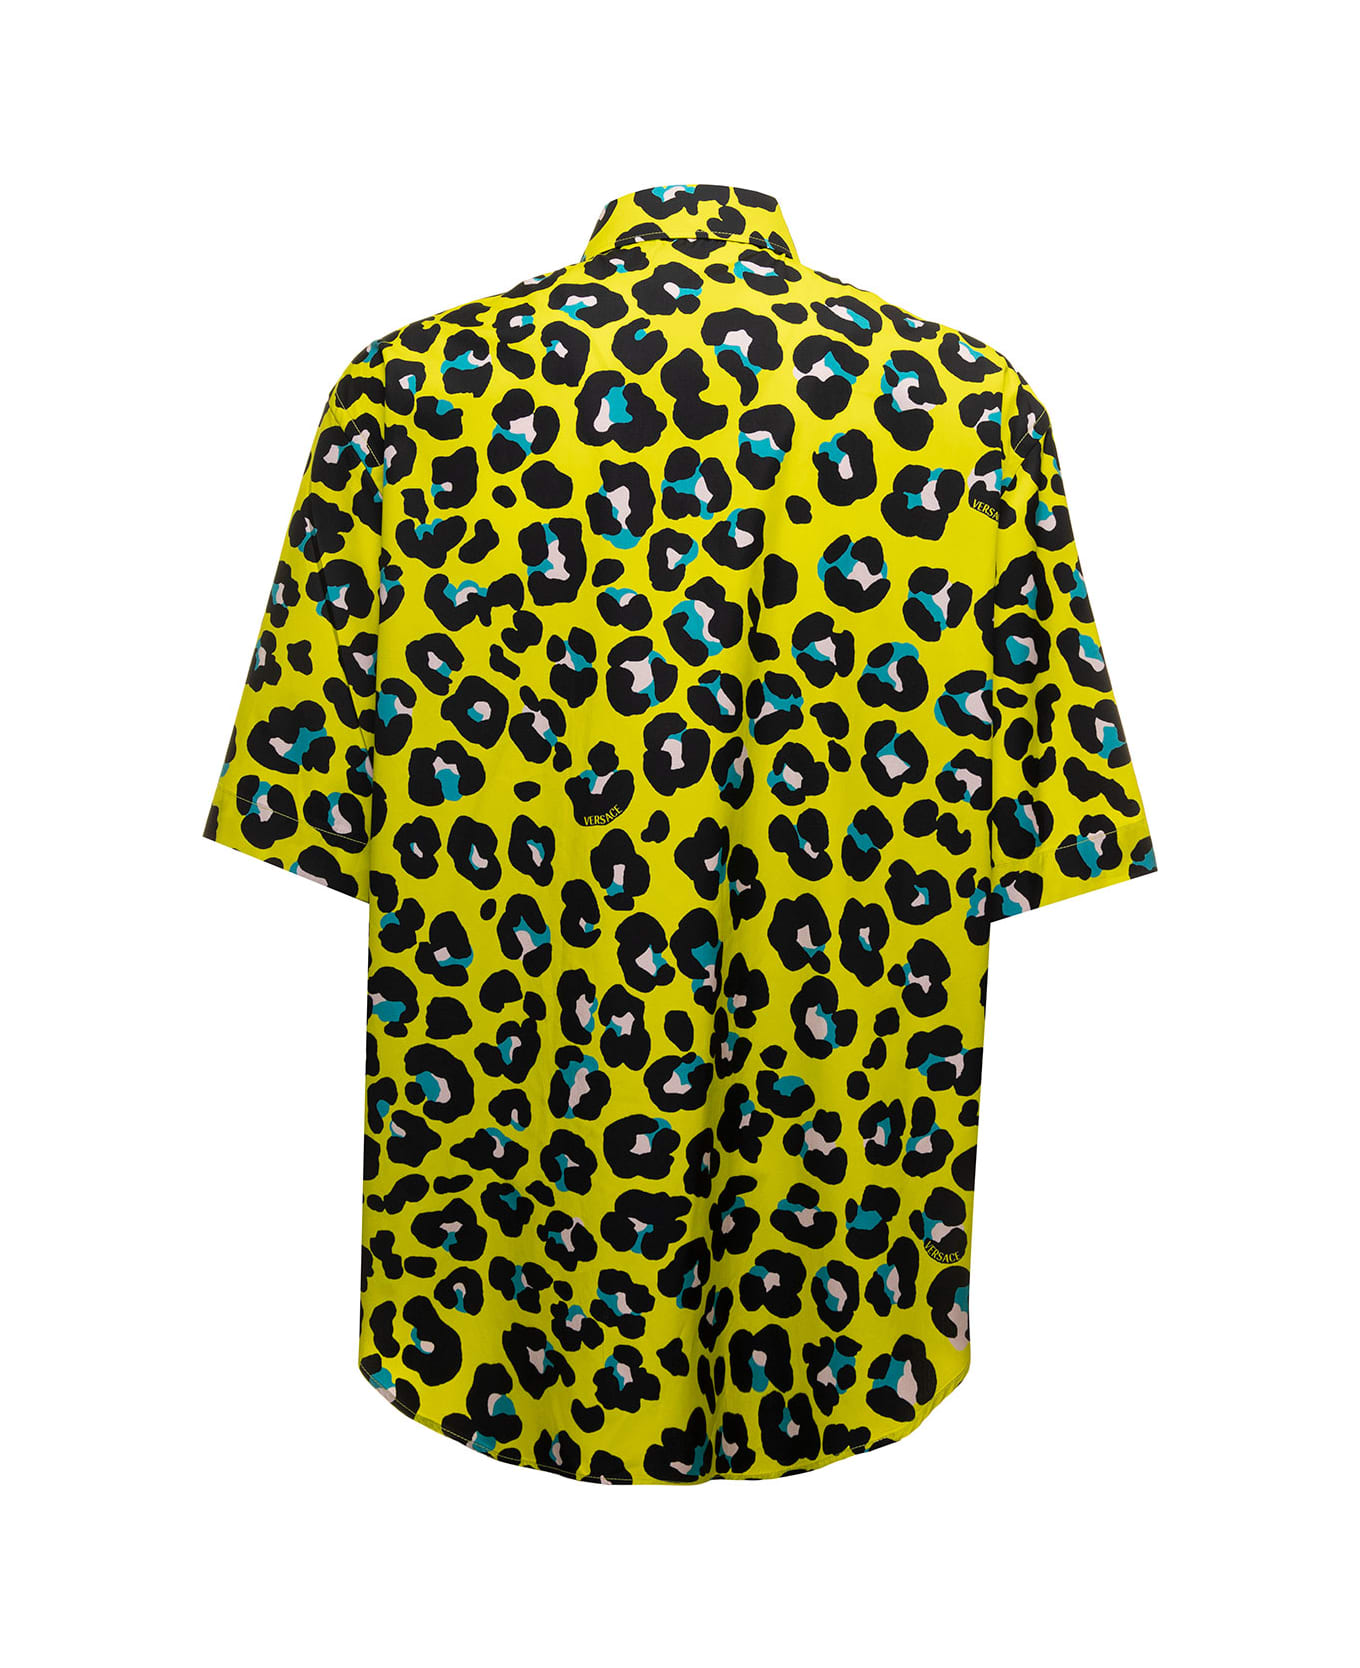 Versace Yellow Shirt In Cotton With Daisy Leopard Allover Pattern Versace Man - Yellow